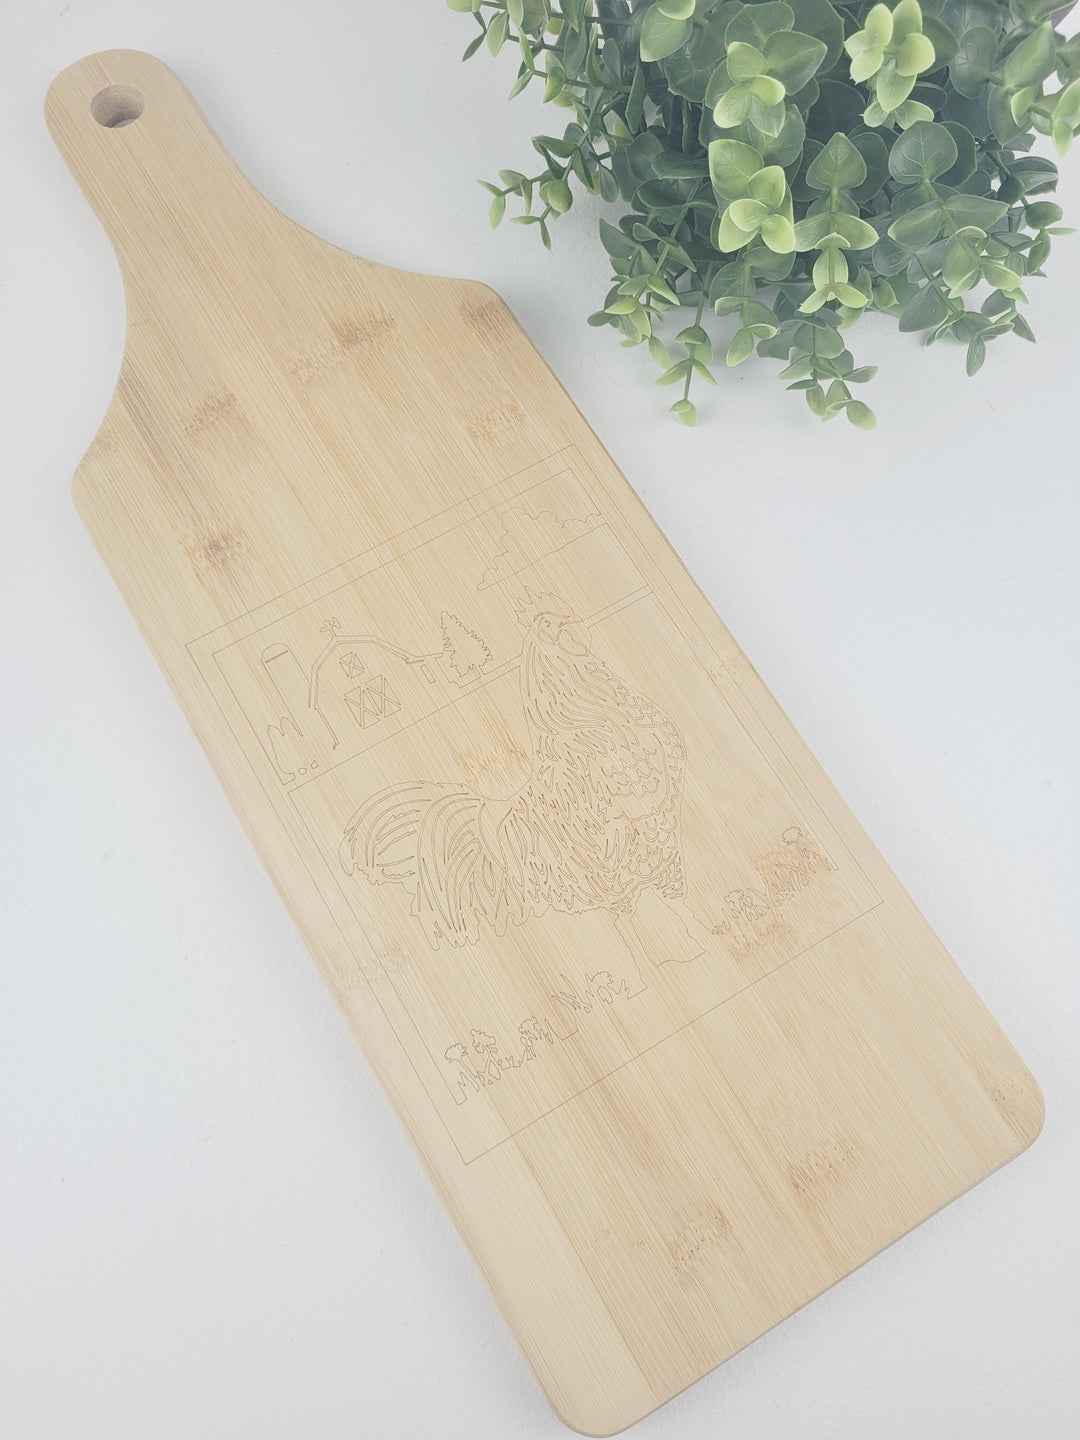 The Crafty Nerd, Engraved Bamboo Serving Board